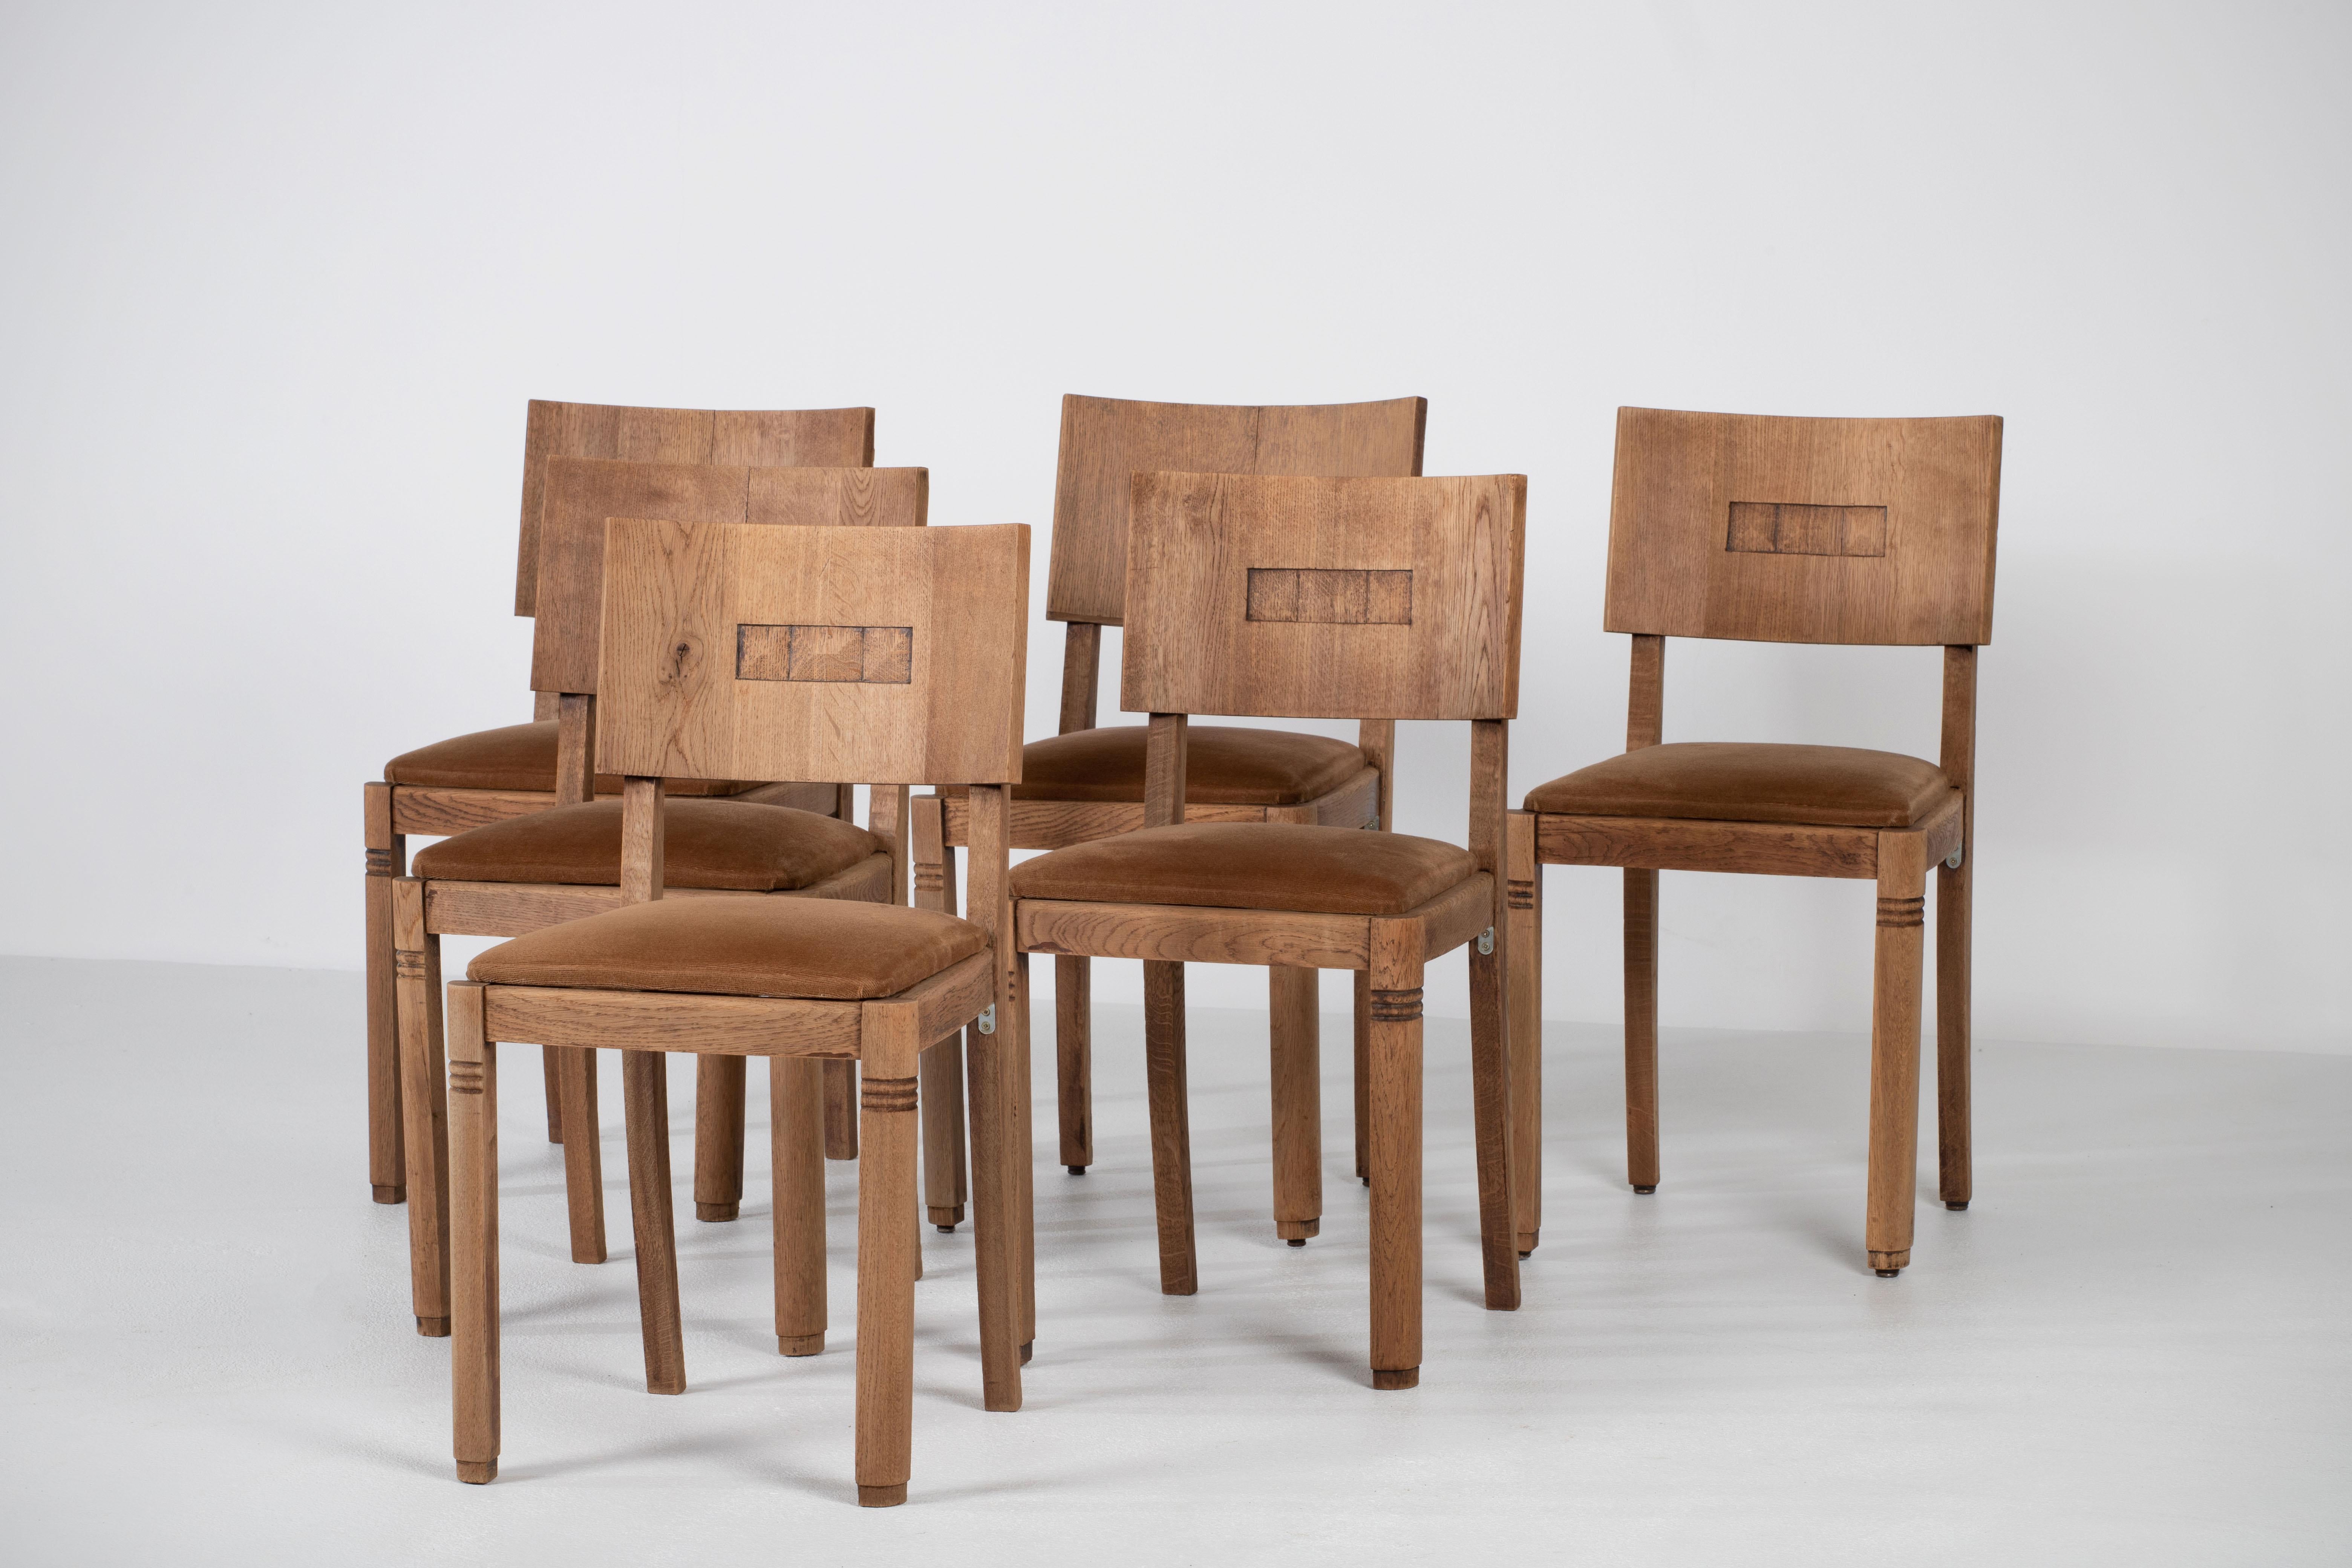 French Art Deco Set of 6 Chairs, Dudouyt Insp, France, 1940